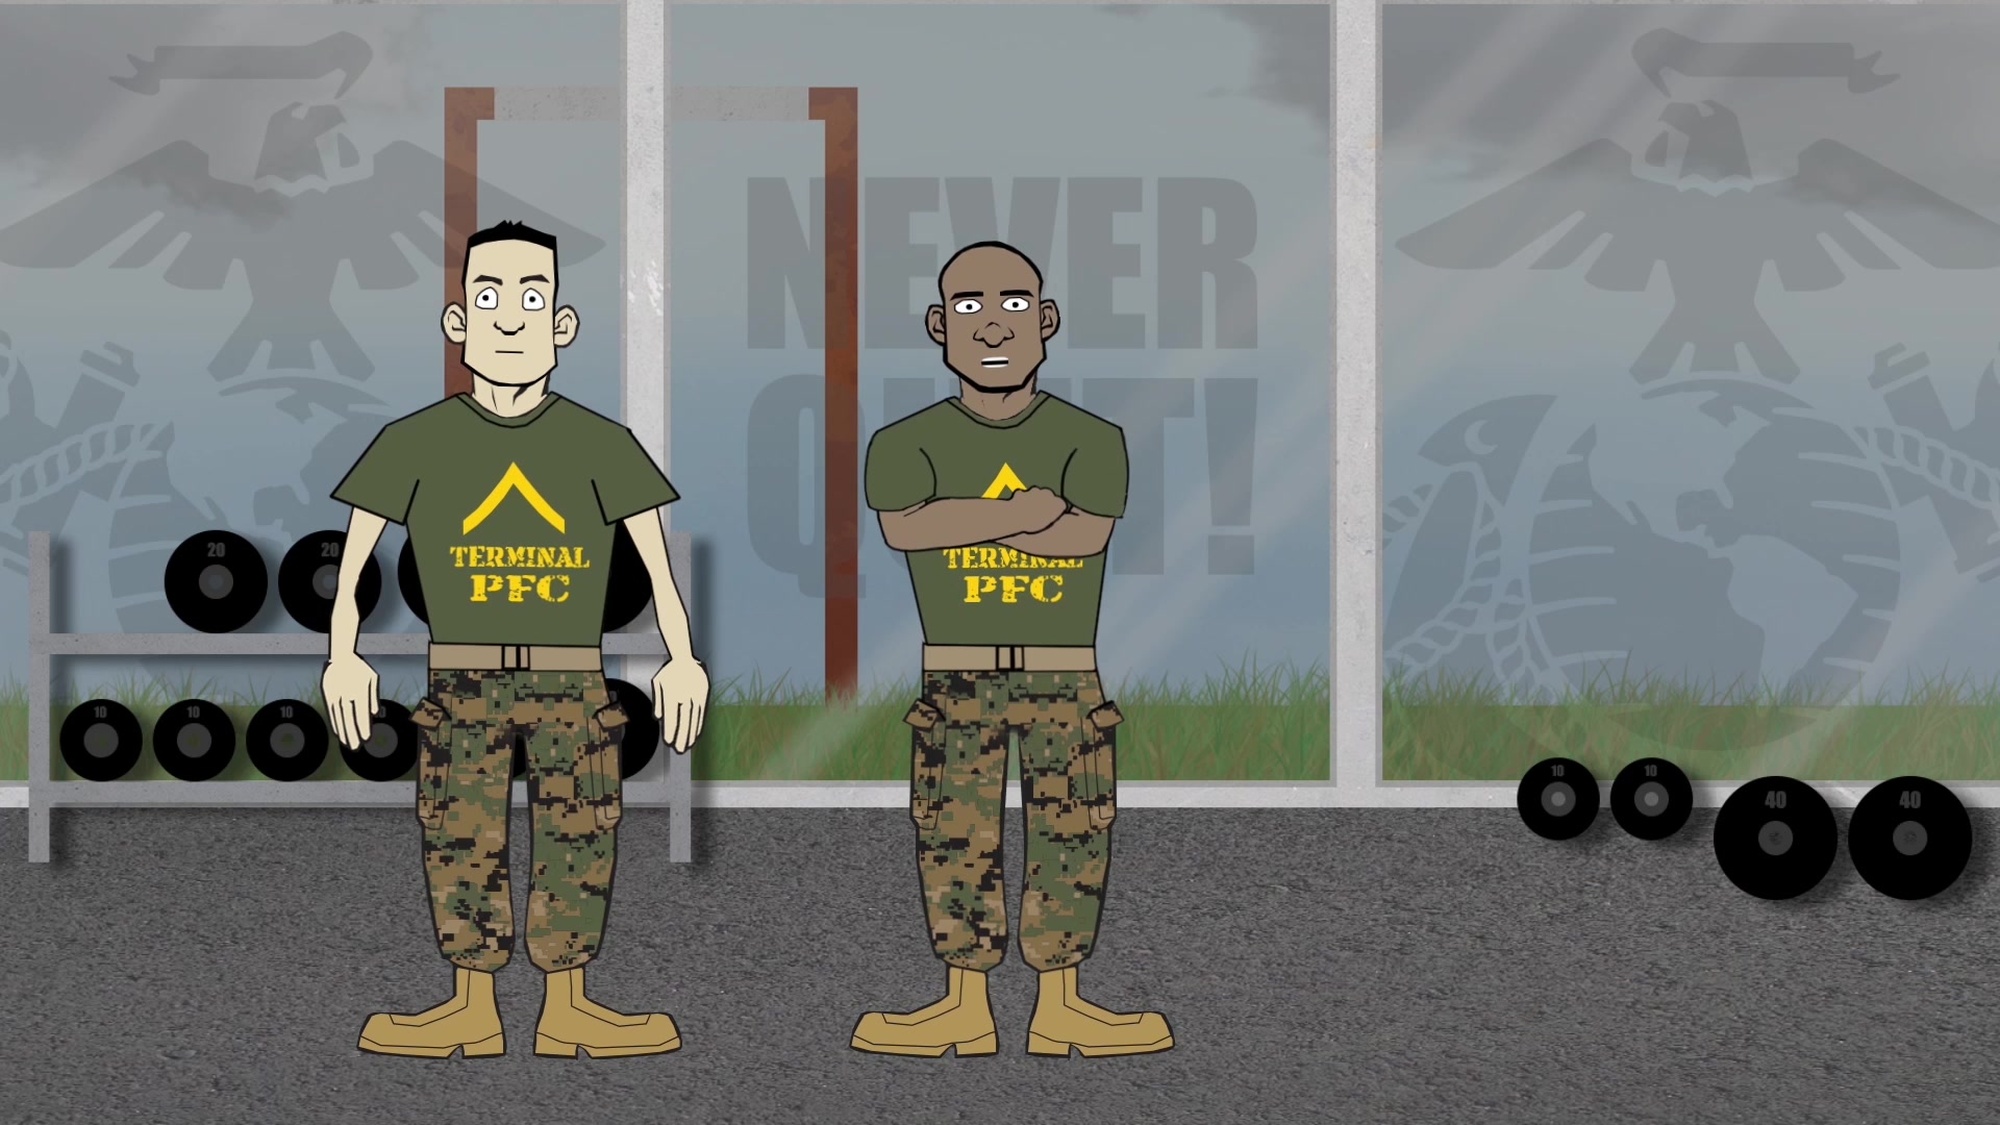 U.S. Marine Corps public service announcement about understanding sexual consent, Feb. 22, 2017, Camp Lejeune, N.C. The animation was created in collaboration with the Victim Legal Counsel Organization, Trial Services Organization, and the Defense Services Organization in order to metaphorically explain the concept of sexual consent. (U.S. Marine Corps animation created by Sgt. Derek L. Picklesimer and Staff Sgt. Albert J. Carls, MCIEAST Combat Camera/Released)